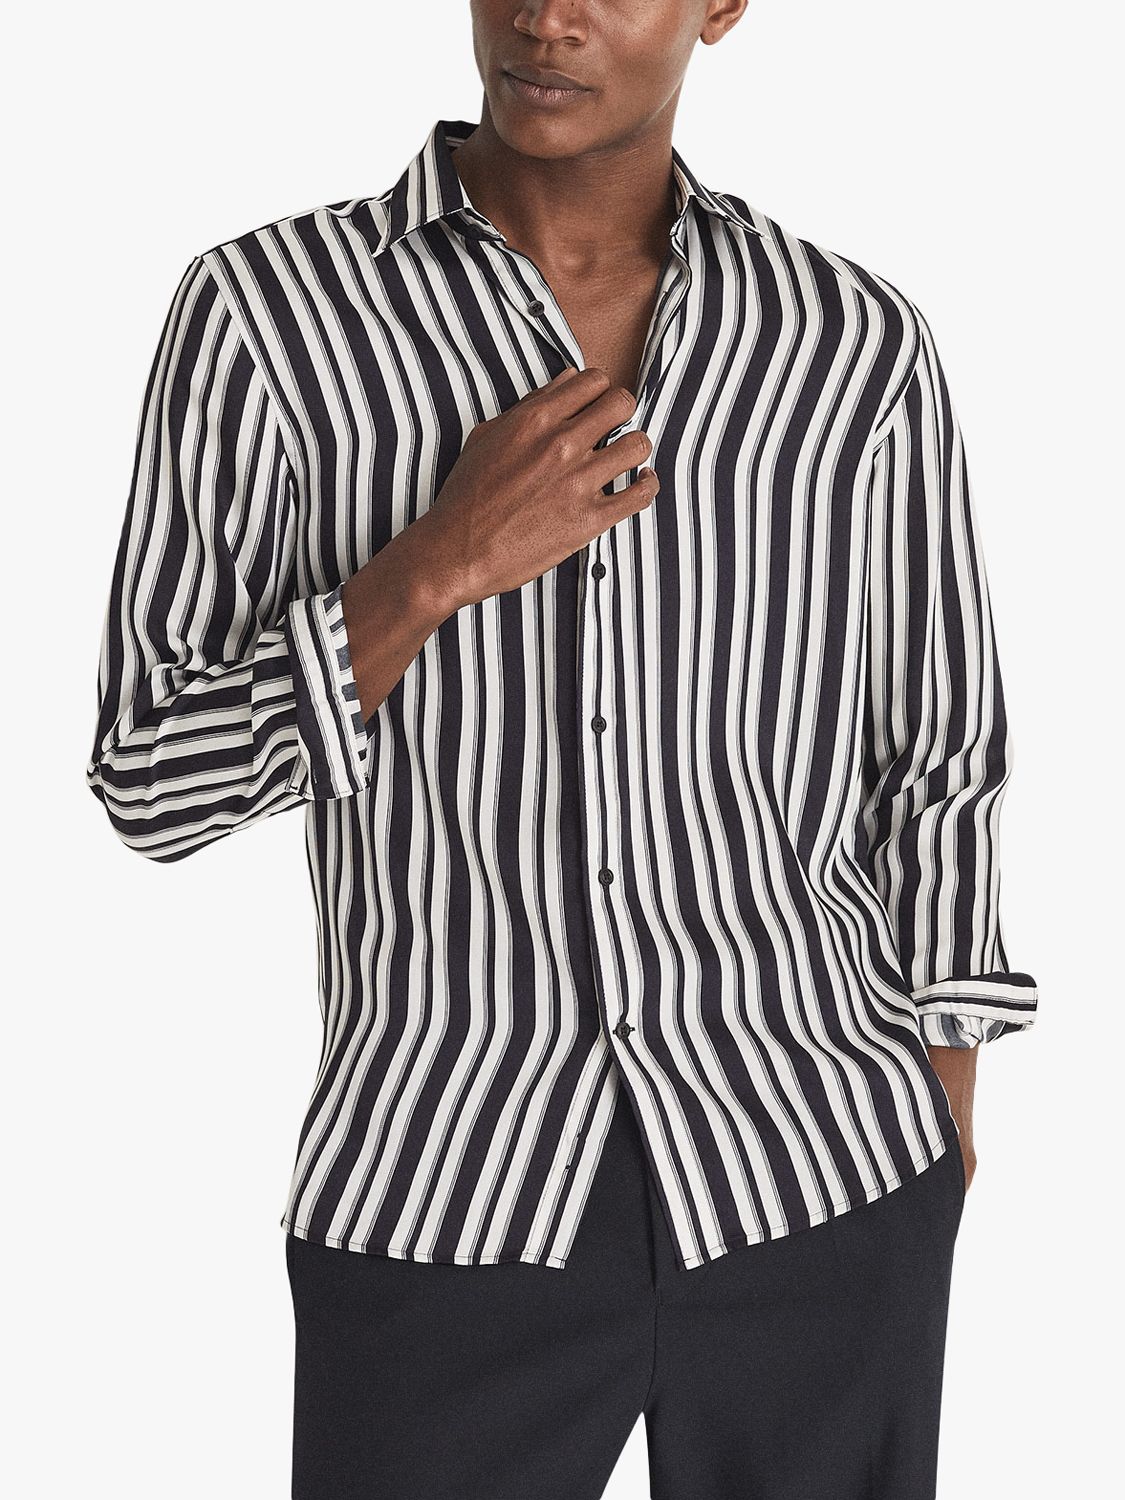 Reiss French Stripe Recycled Polyester Shirt at John Lewis & Partners